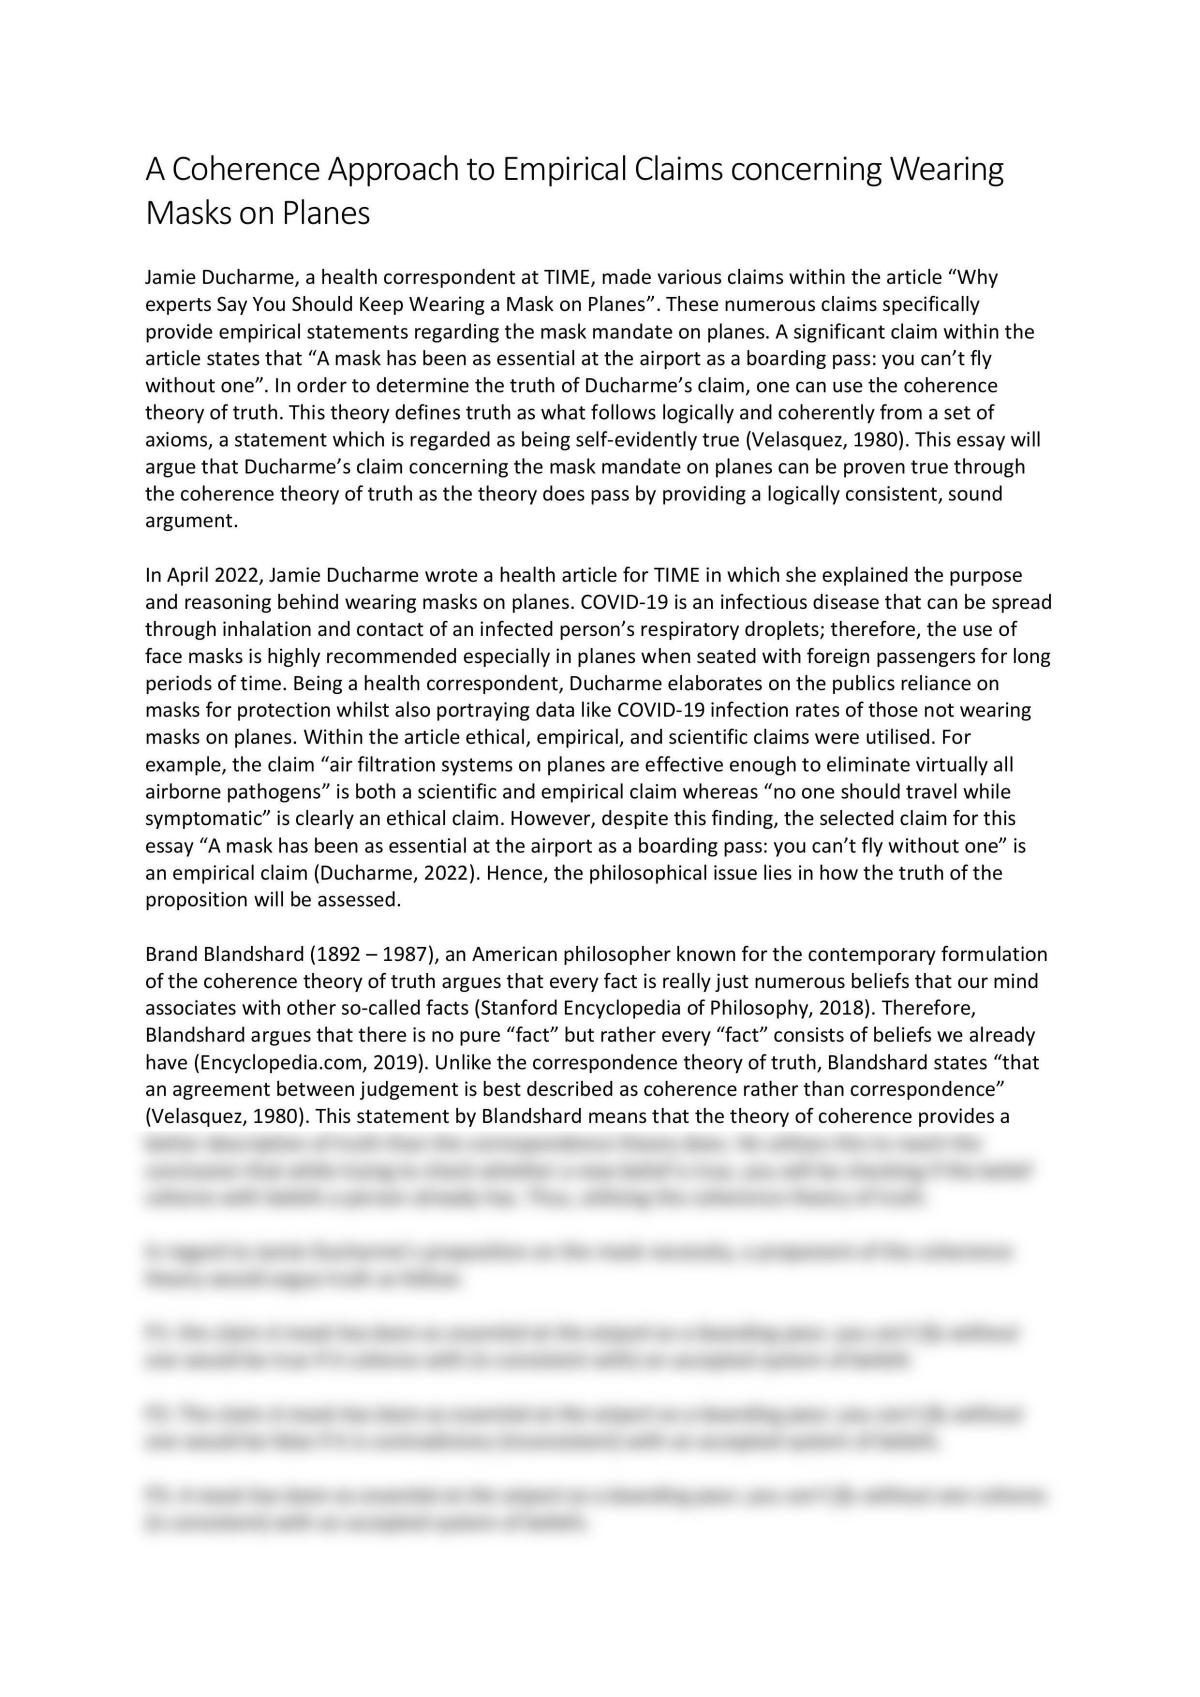 Essay displaying the coherence approach to empirical claims - Page 1